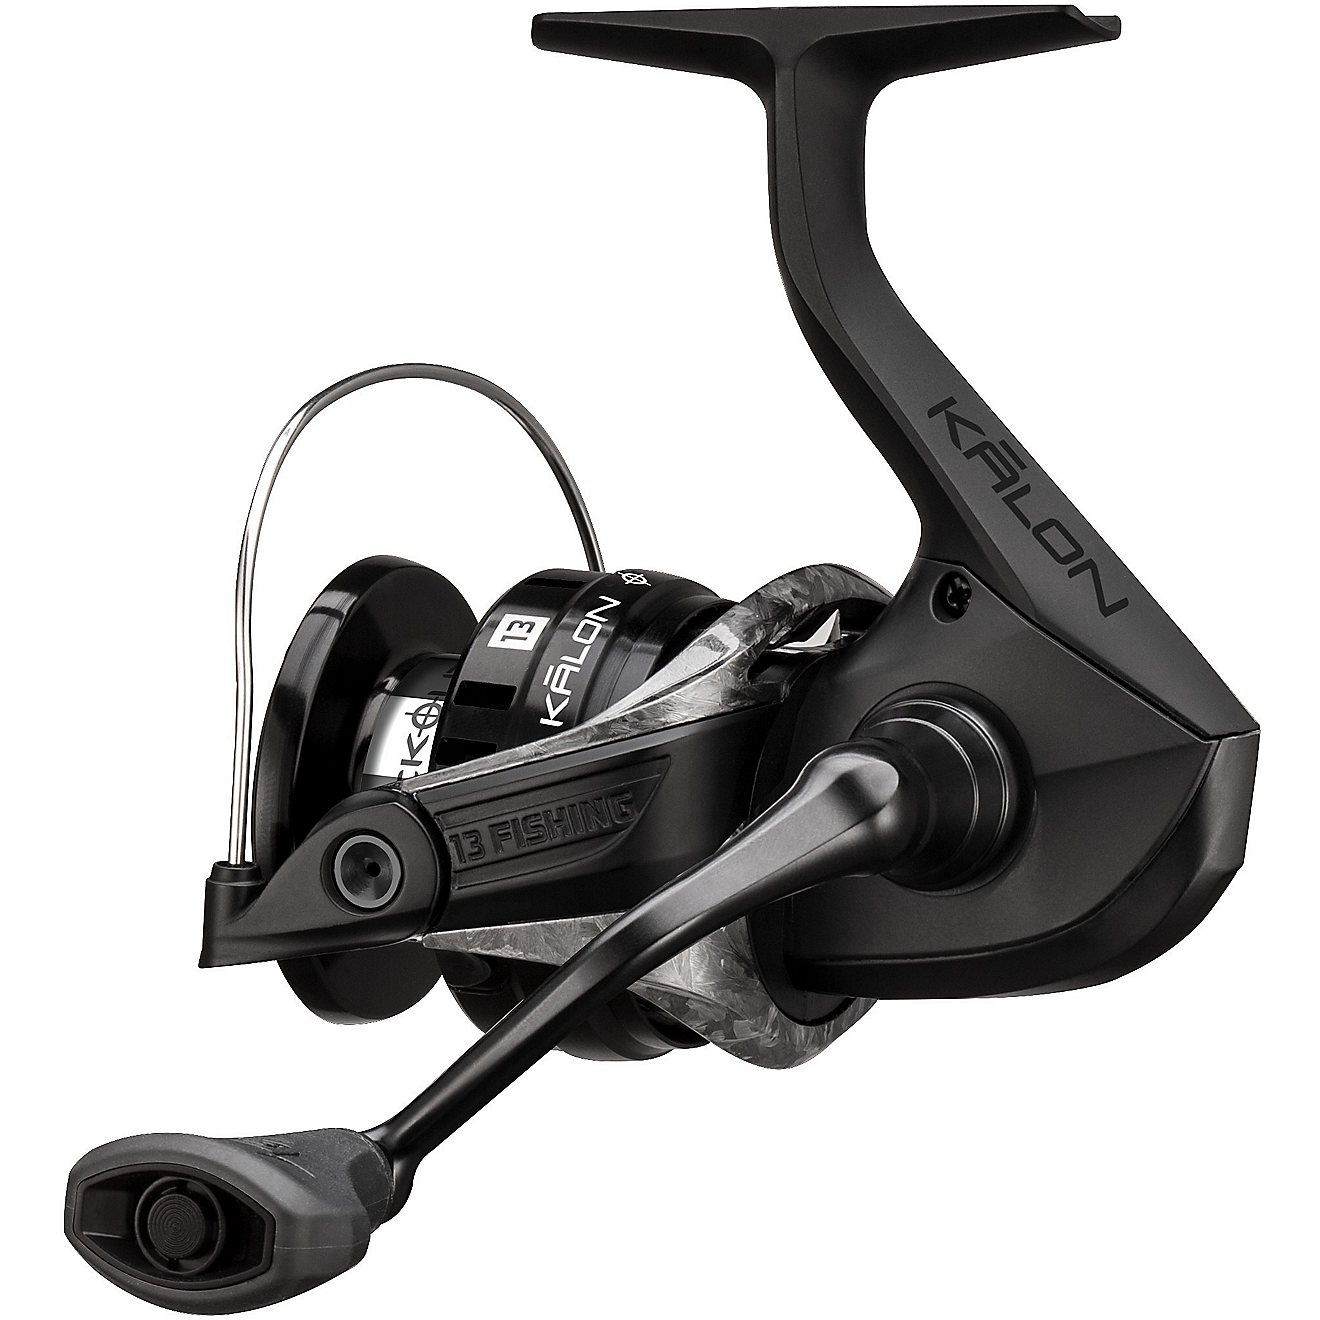 13 Fishing Blackout Series Kalon Specialty Spinning Reel                                                                         - view number 3